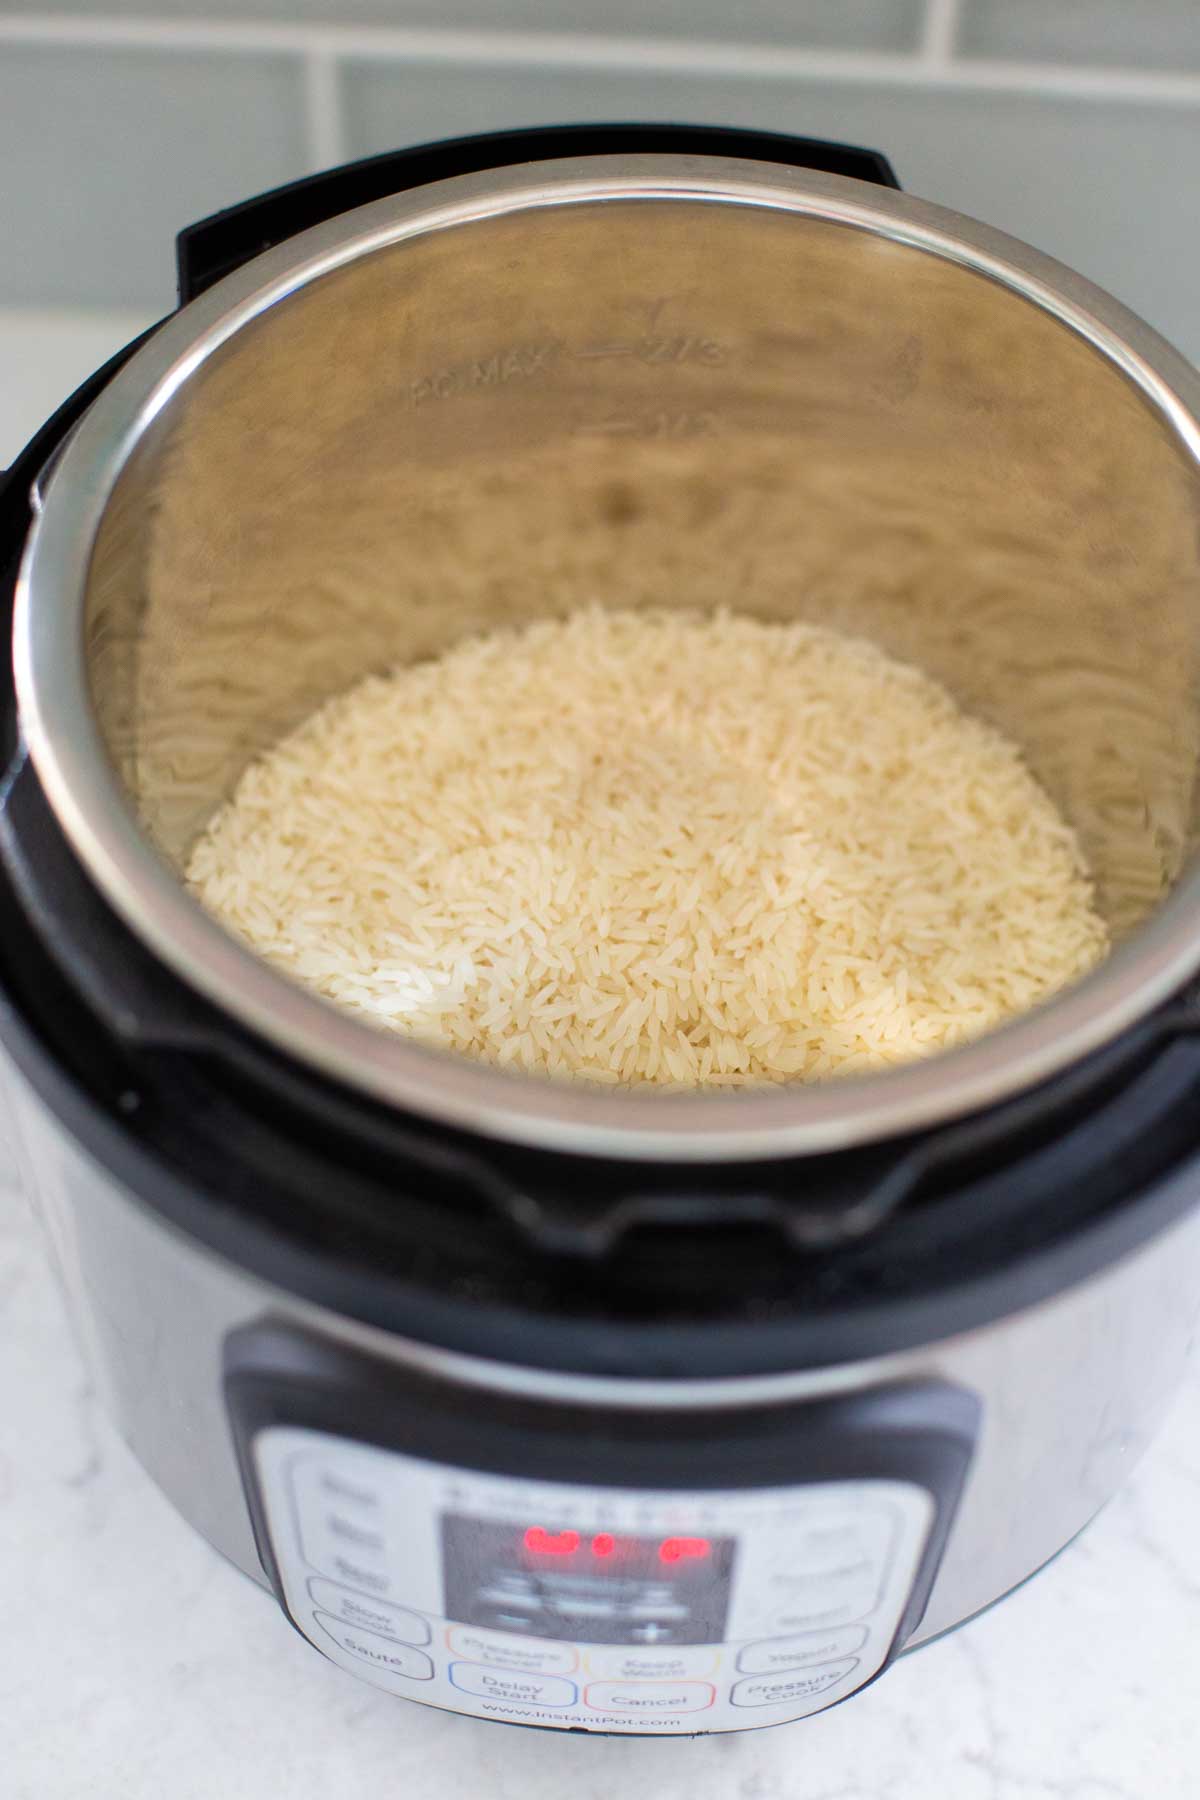 The dry white rice has been added to the Instant Pot pot.